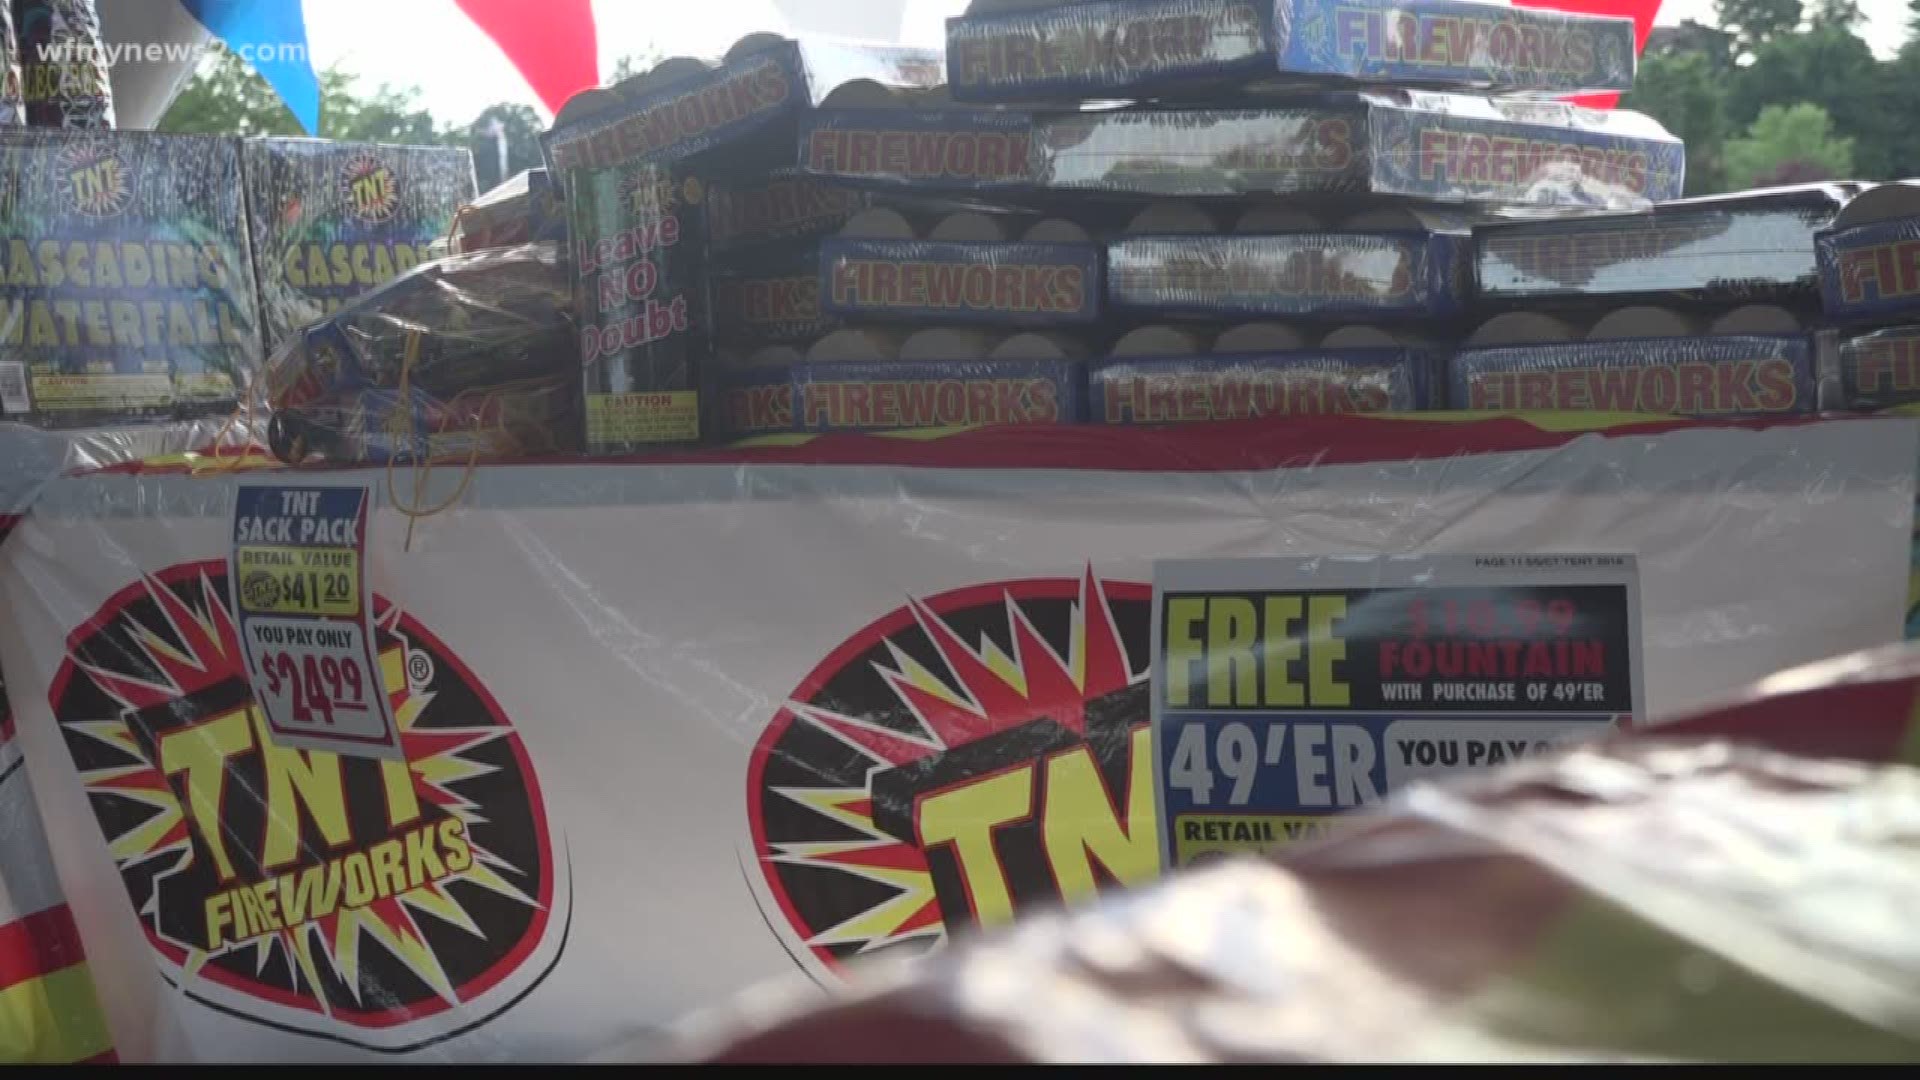 What To Know Before Buying Fireworks